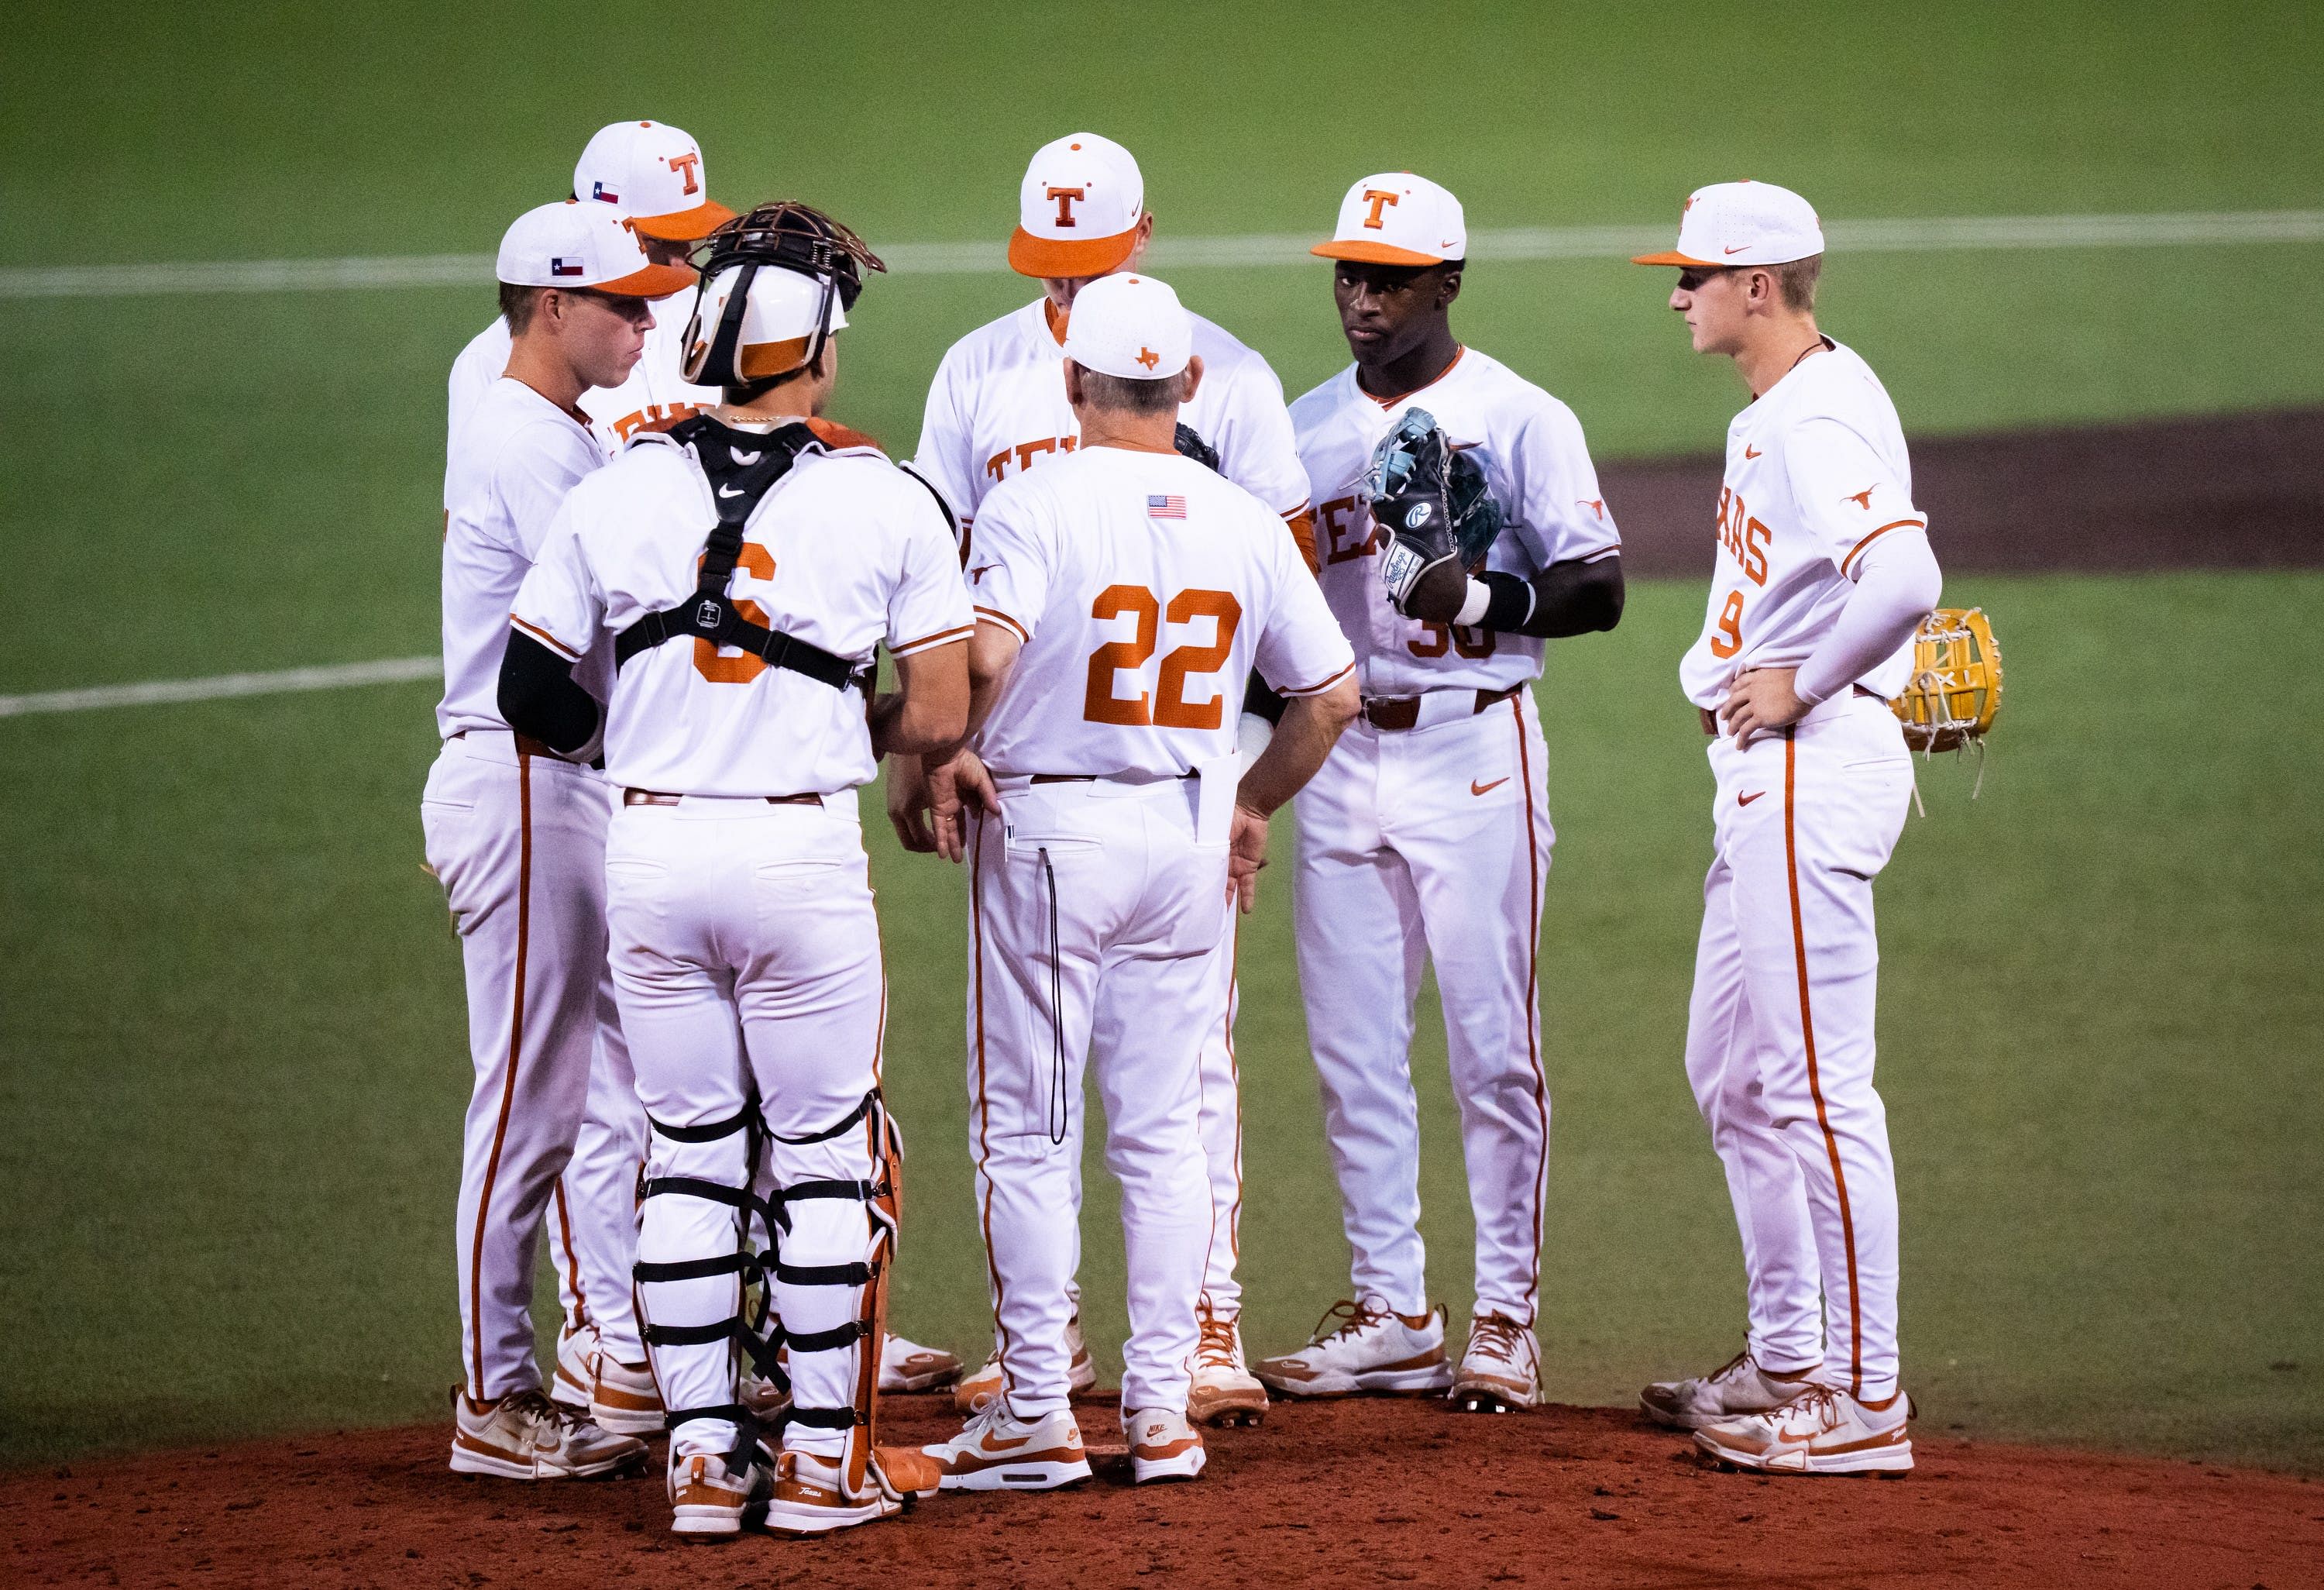 Texas is one of the most lucrative college baseball teams in the nation.